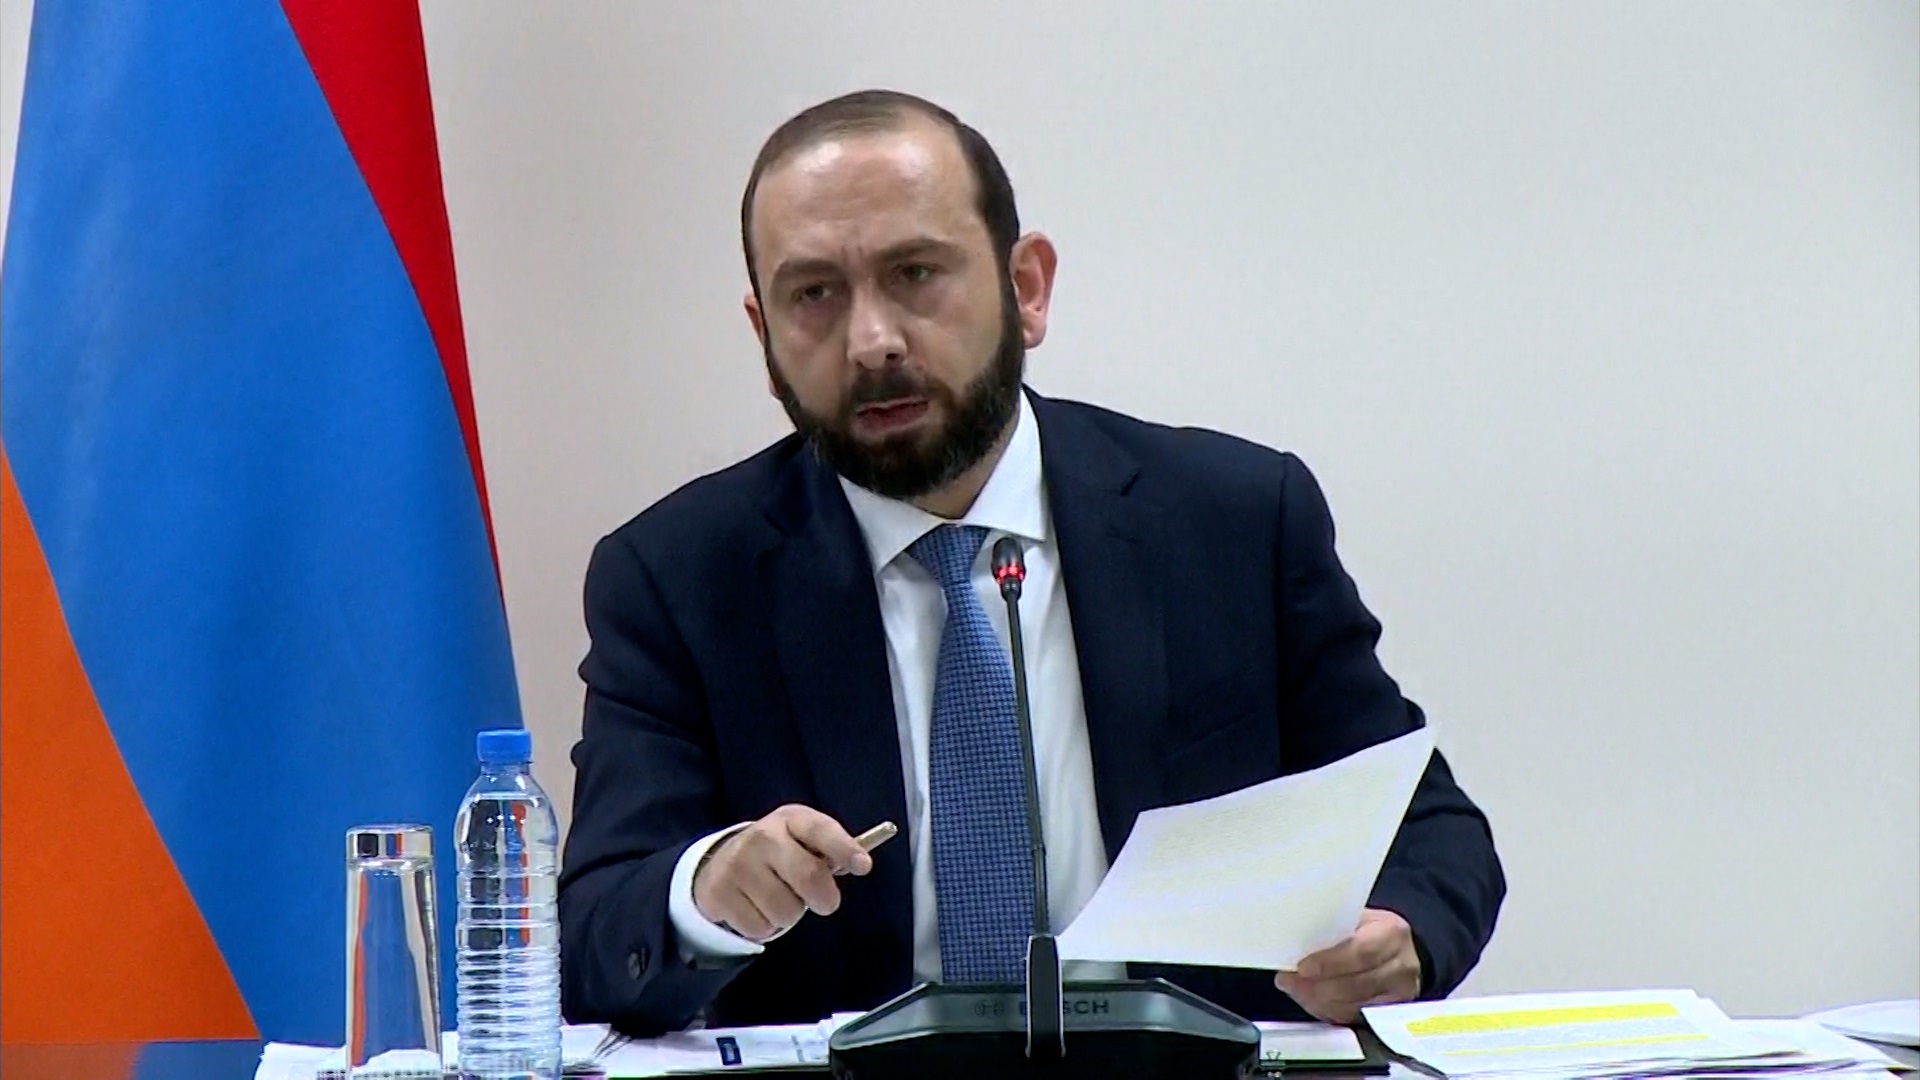 Results of 2023: Ararat Mirzoyan's press conference